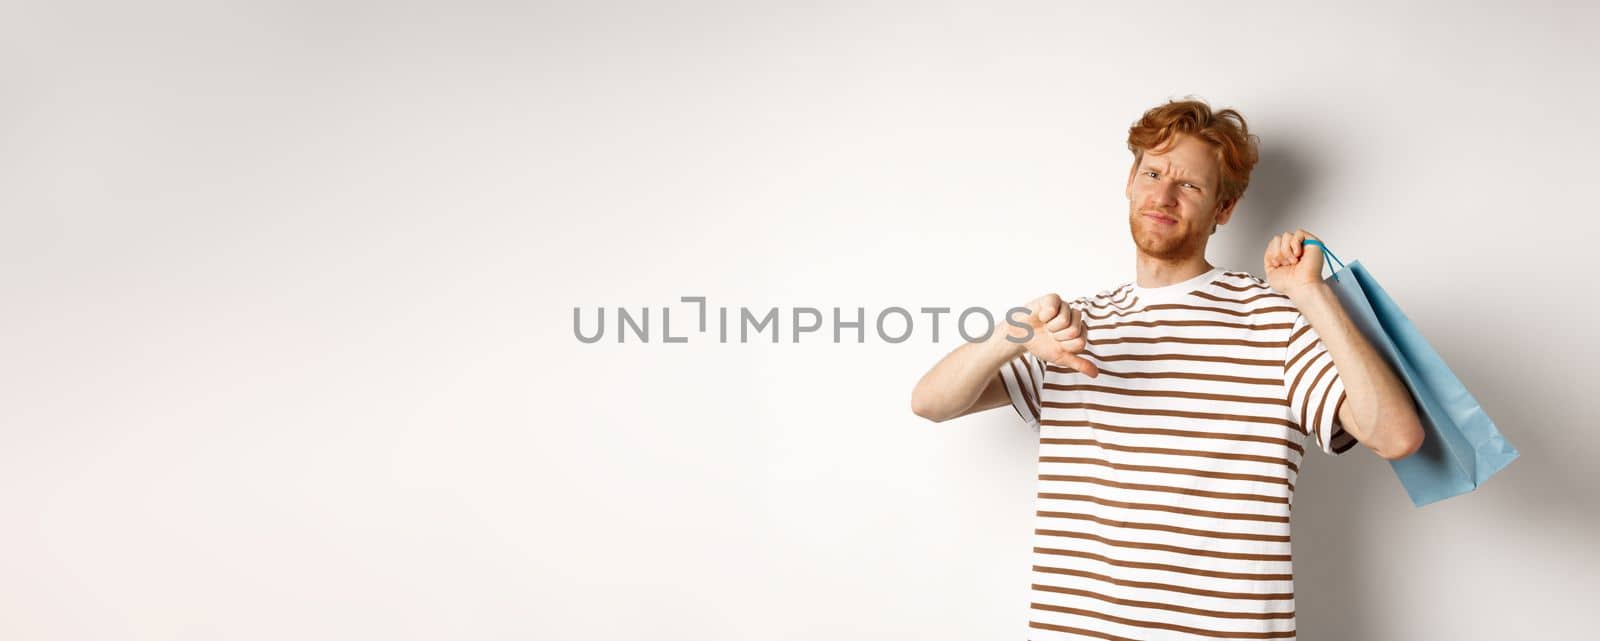 Disappointed young man with red hair and beard showing thumbs-down after bad shopping experience, holding bag over shoulder and frowning upset, white background.